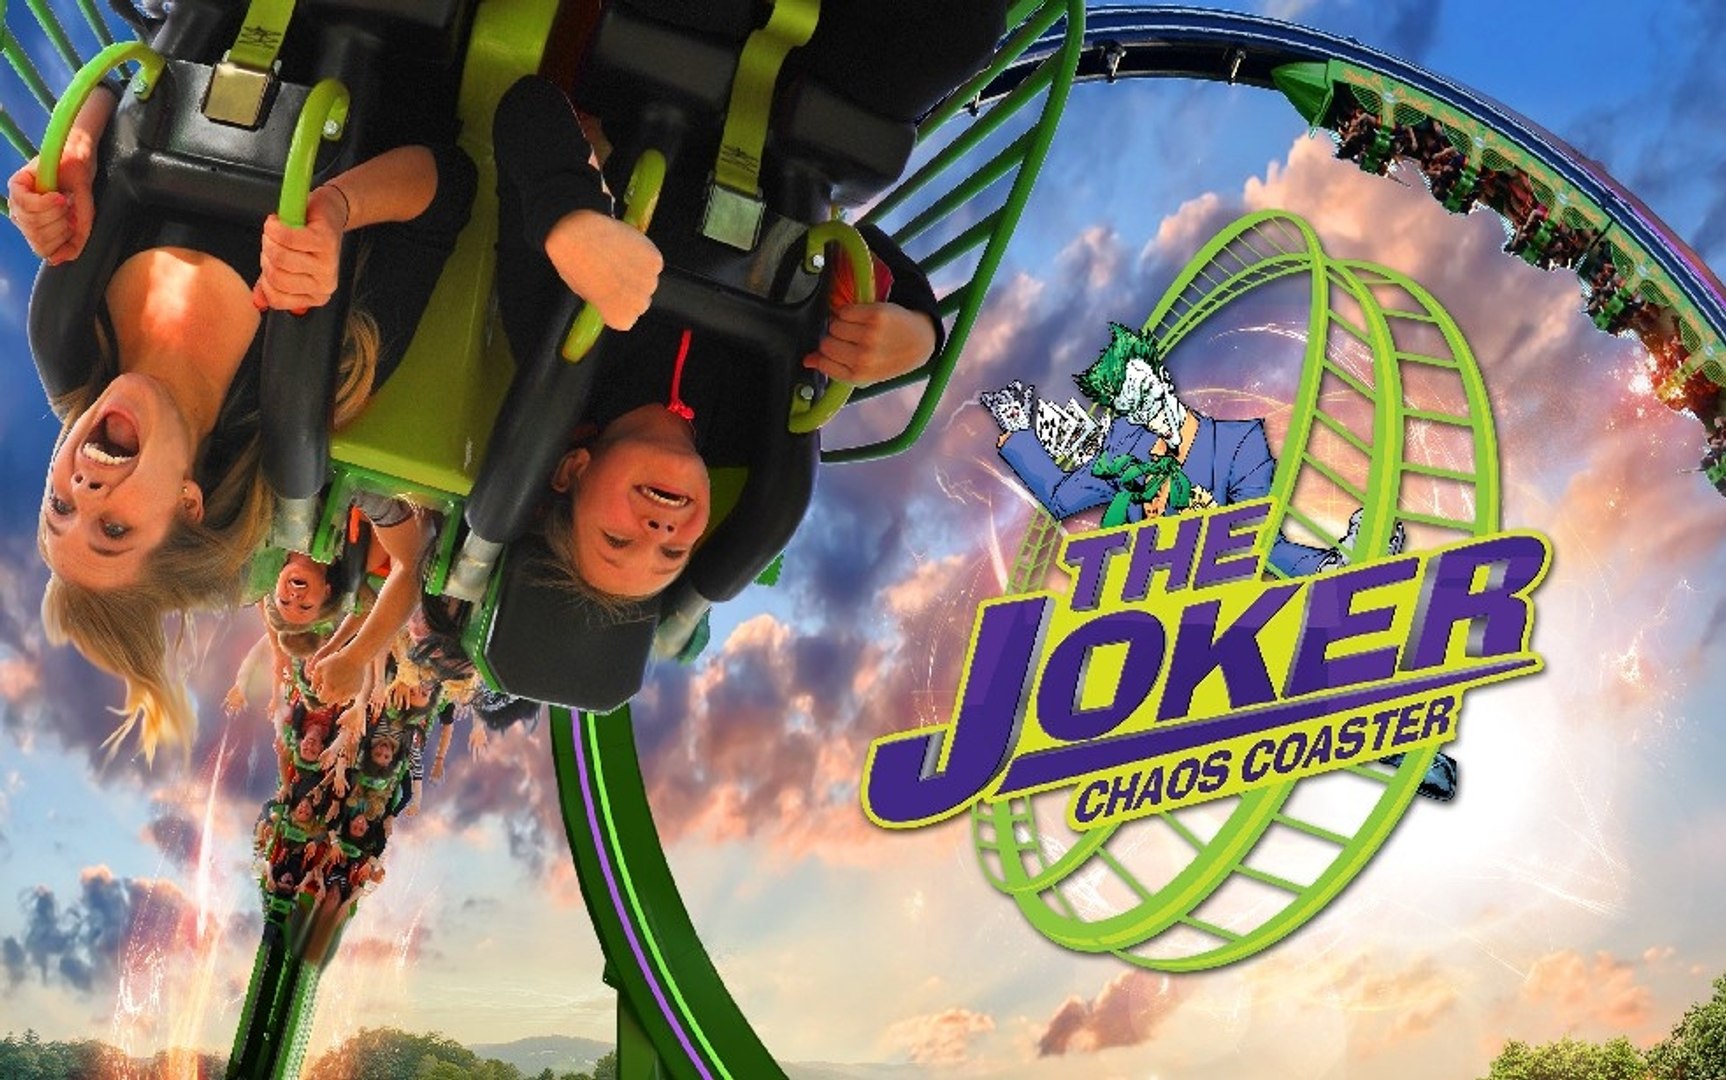 Chaos is Unleashed with THE JOKER Free Fly Coaster at Six Flags